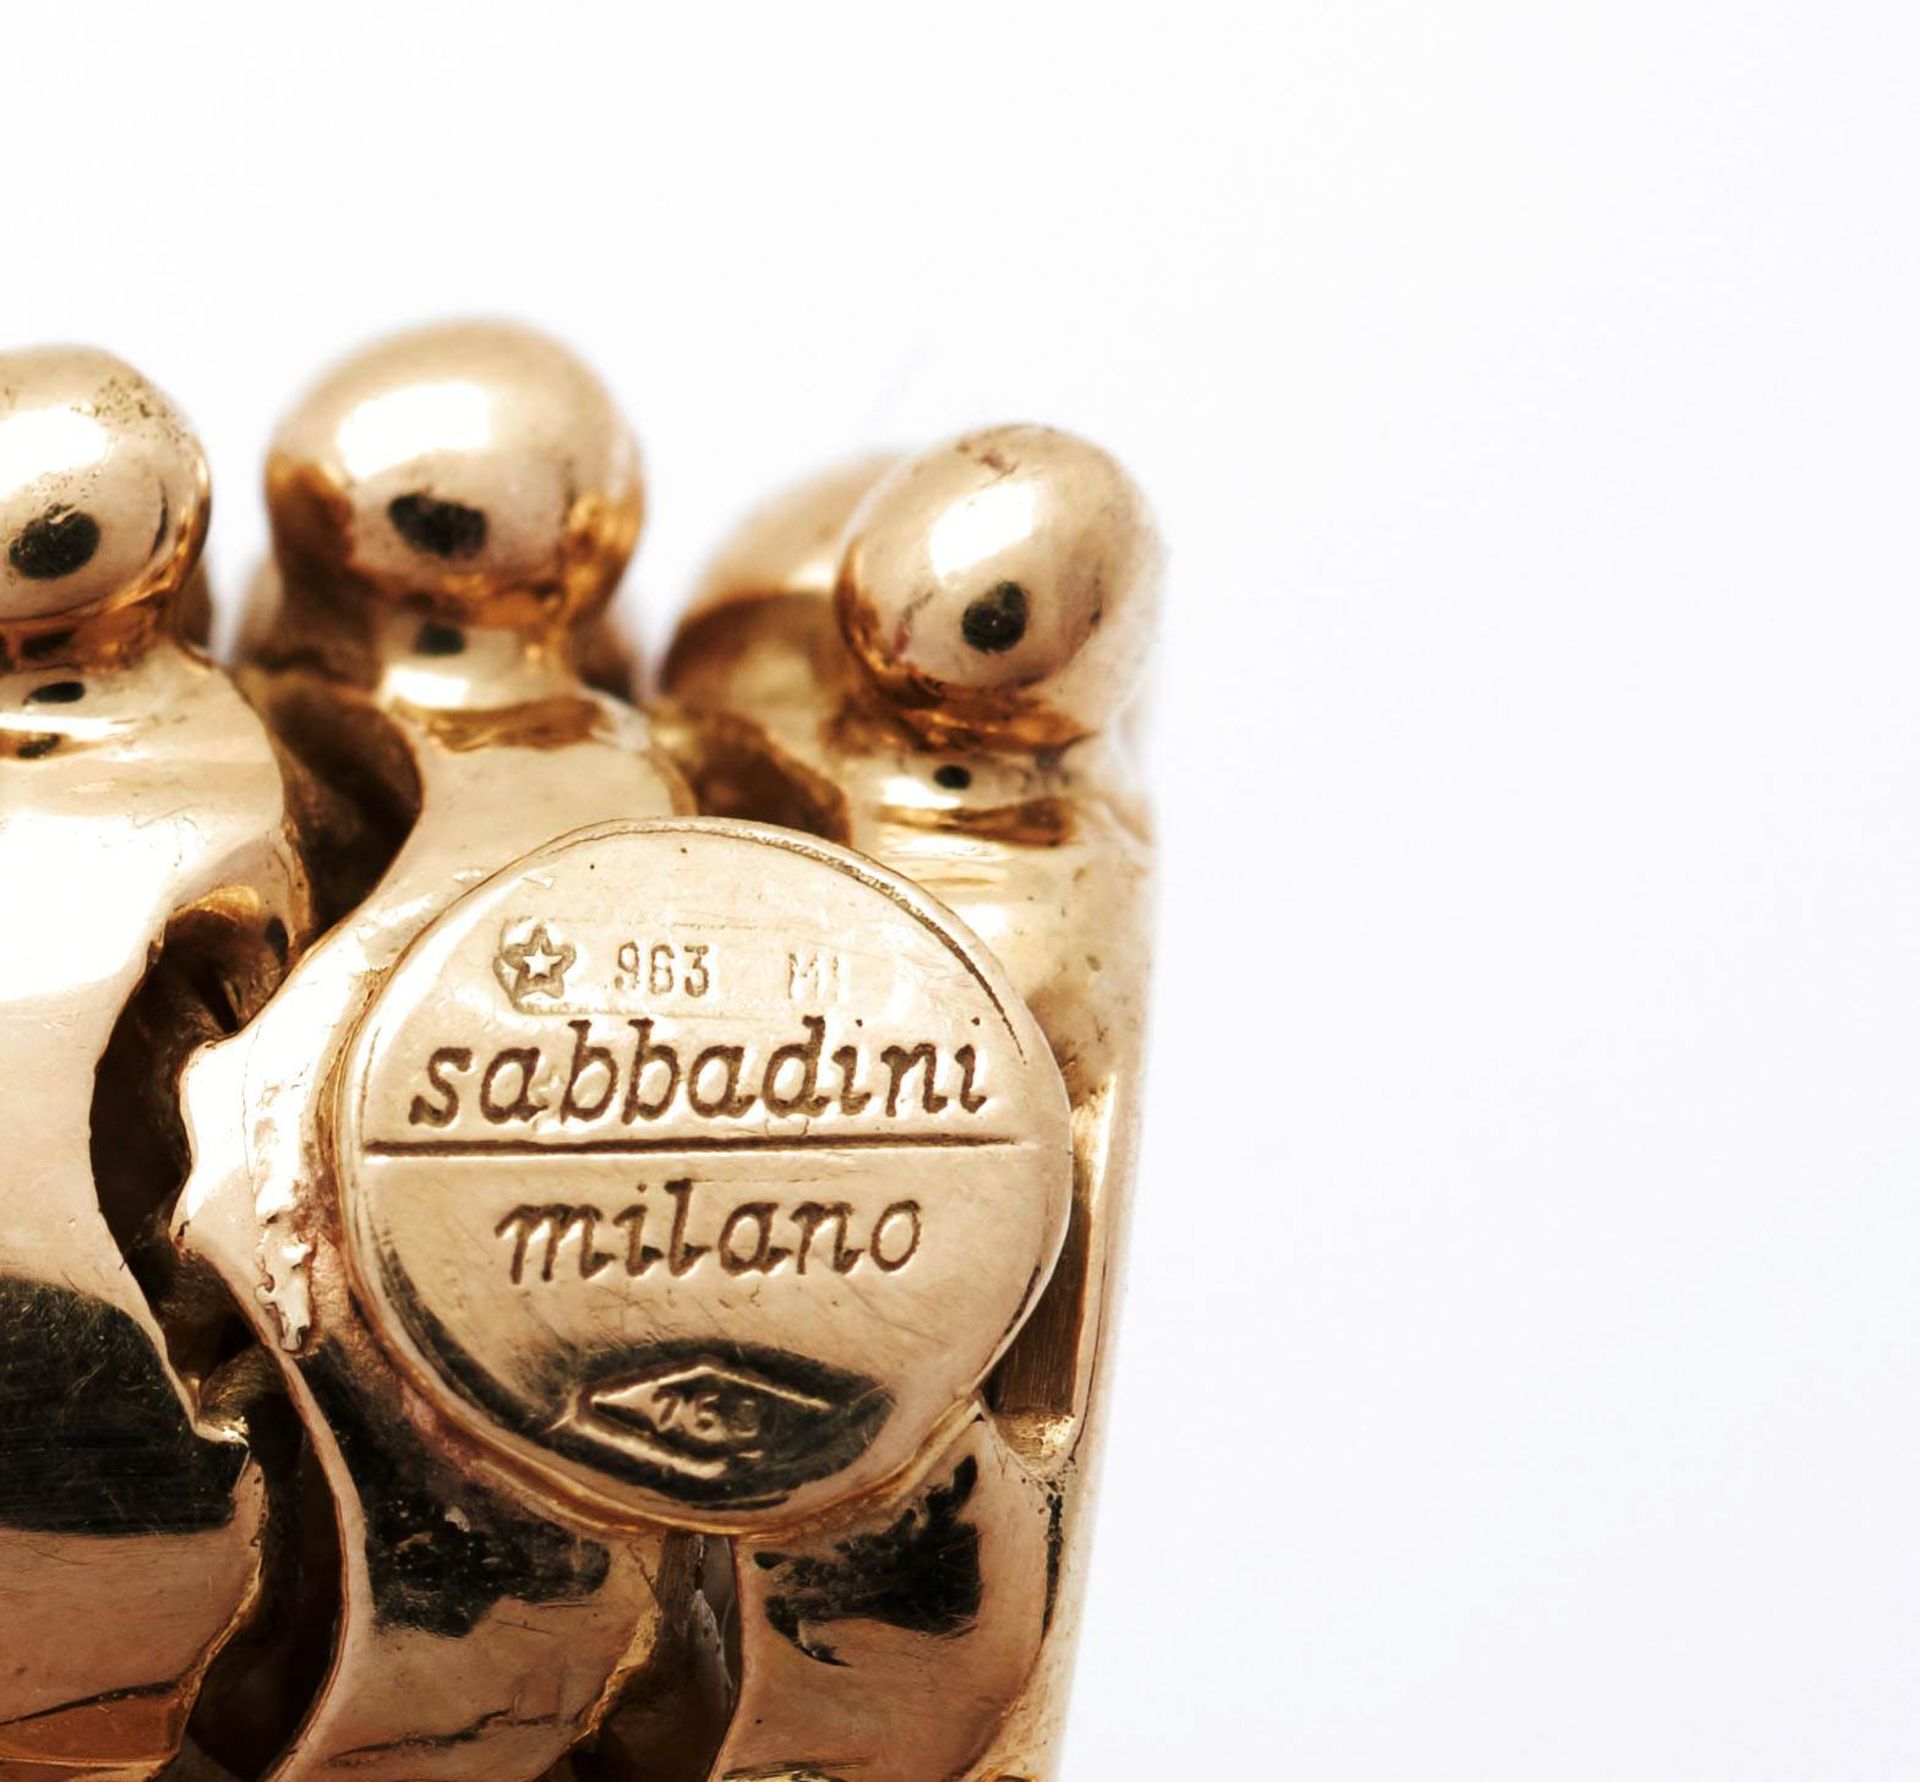 GOLD NECKLACE, BY SABBADINI. - Image 3 of 3